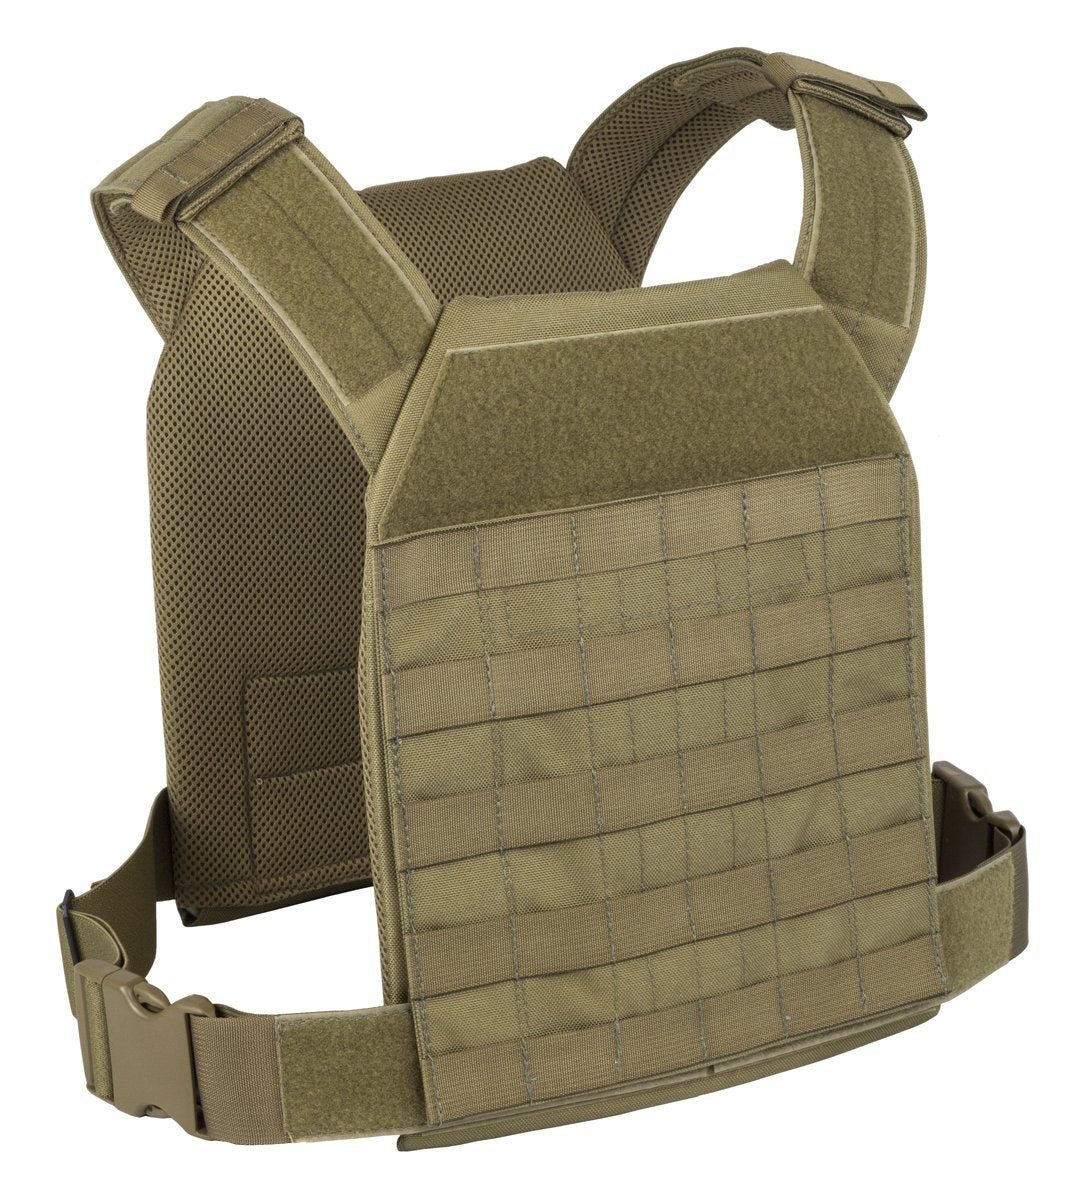 Elite Survival Systems MOLLE Adaptable Lightweight Plate Carriers.